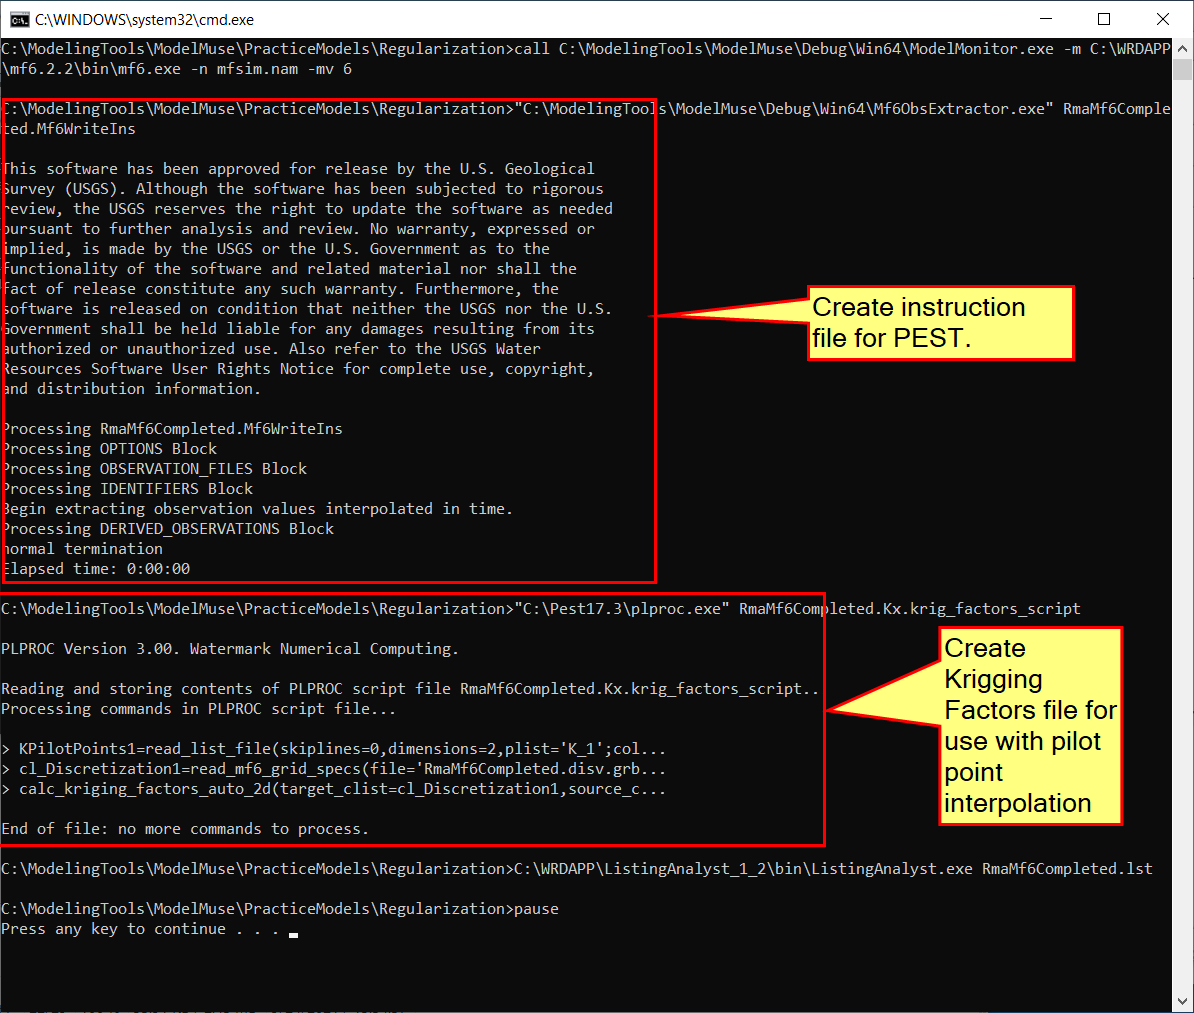 Annotated screen capture identifying purposes of commands in the RunModflow.bat batchfile.